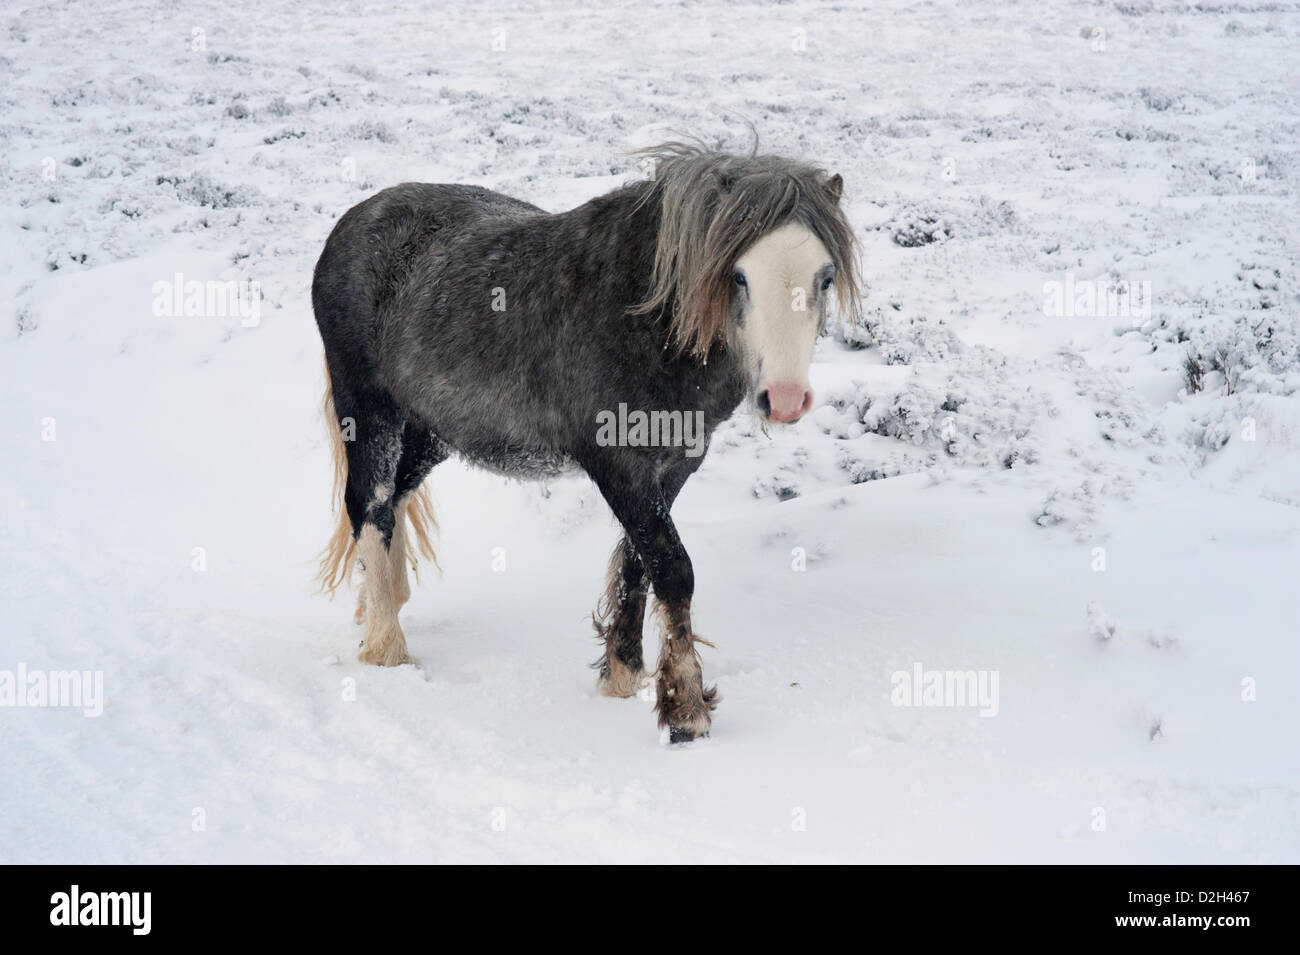 Church Stretton, Shropshire, UK. 24th January 2013. Wild pony in the snow on the Long Mynd.. Stock Photo